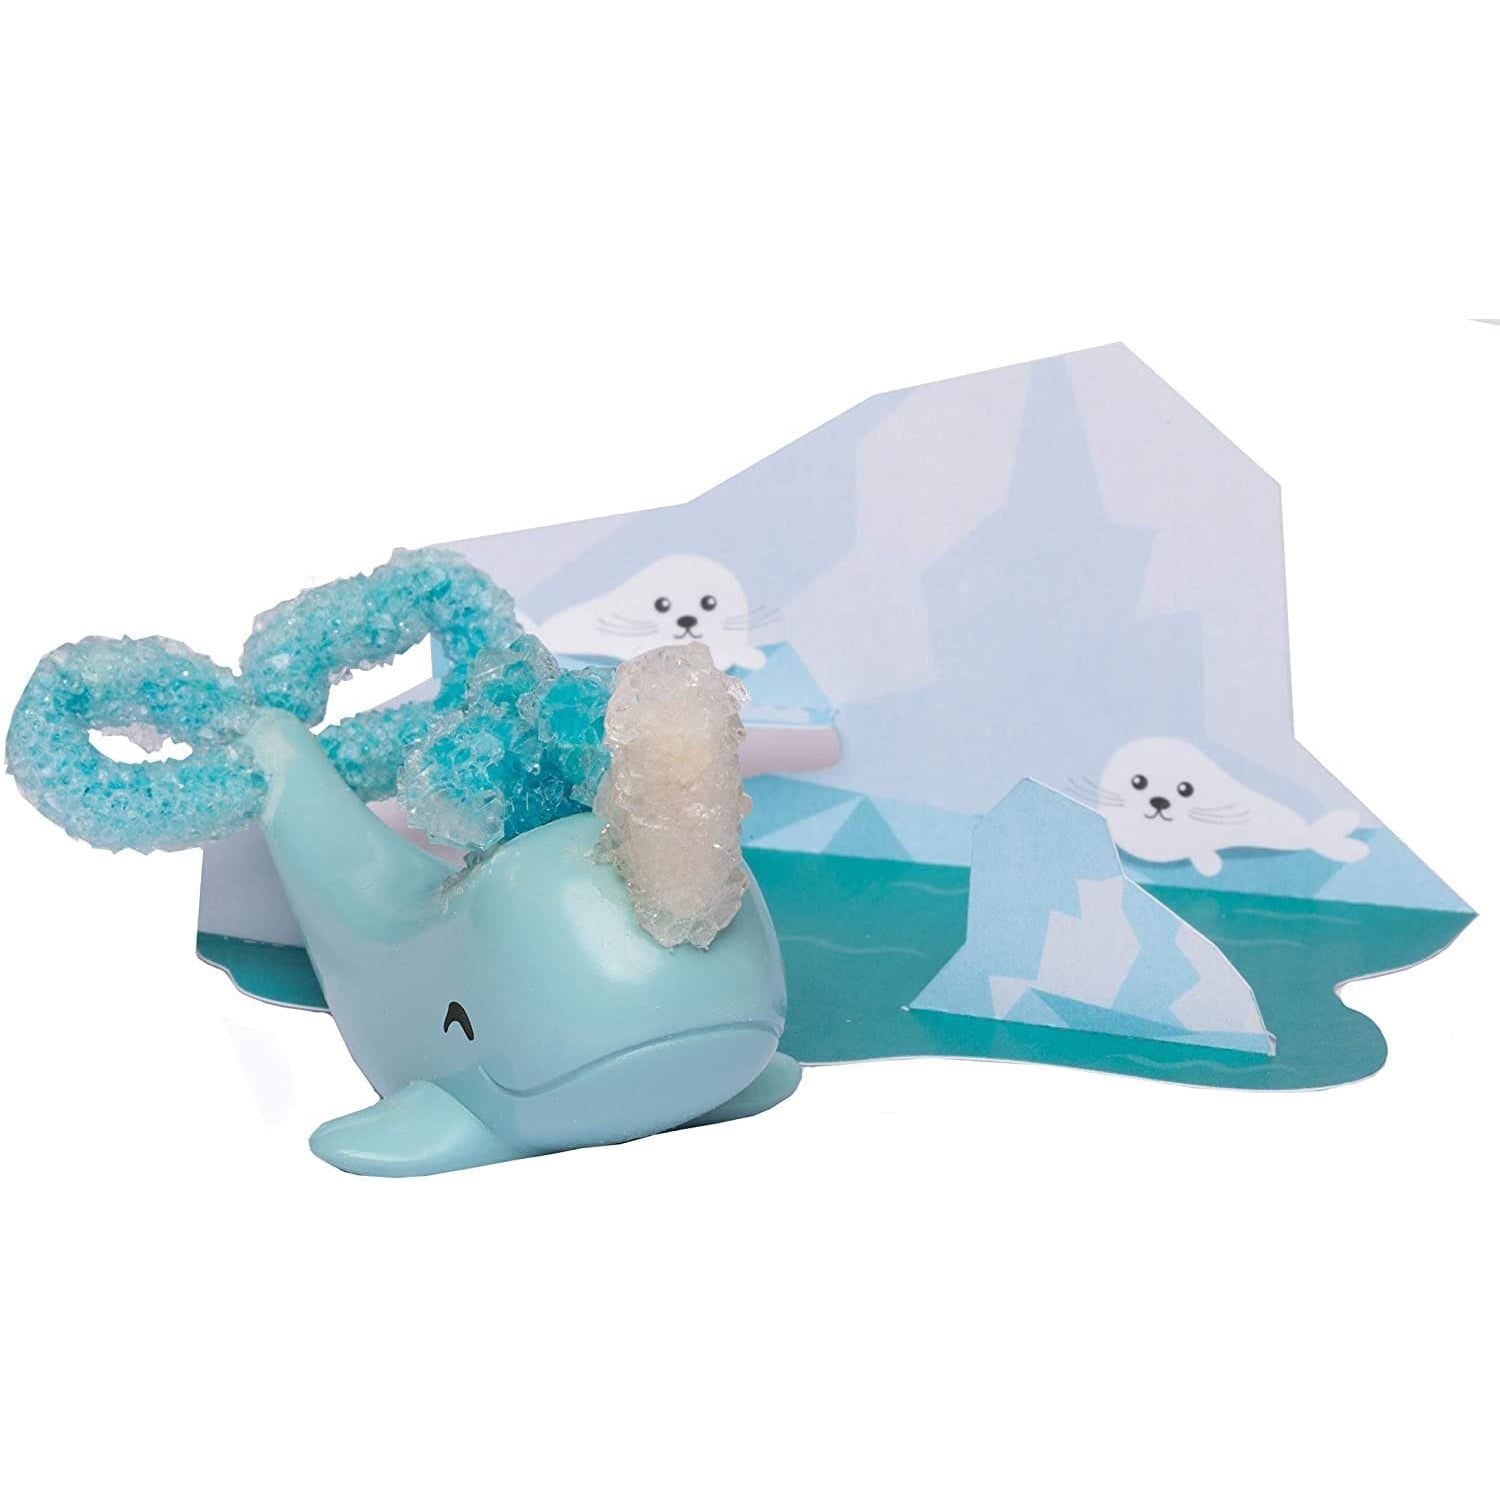 Klutz-Grow Your Own Crystal Narwhal-9781338365542-Legacy Toys